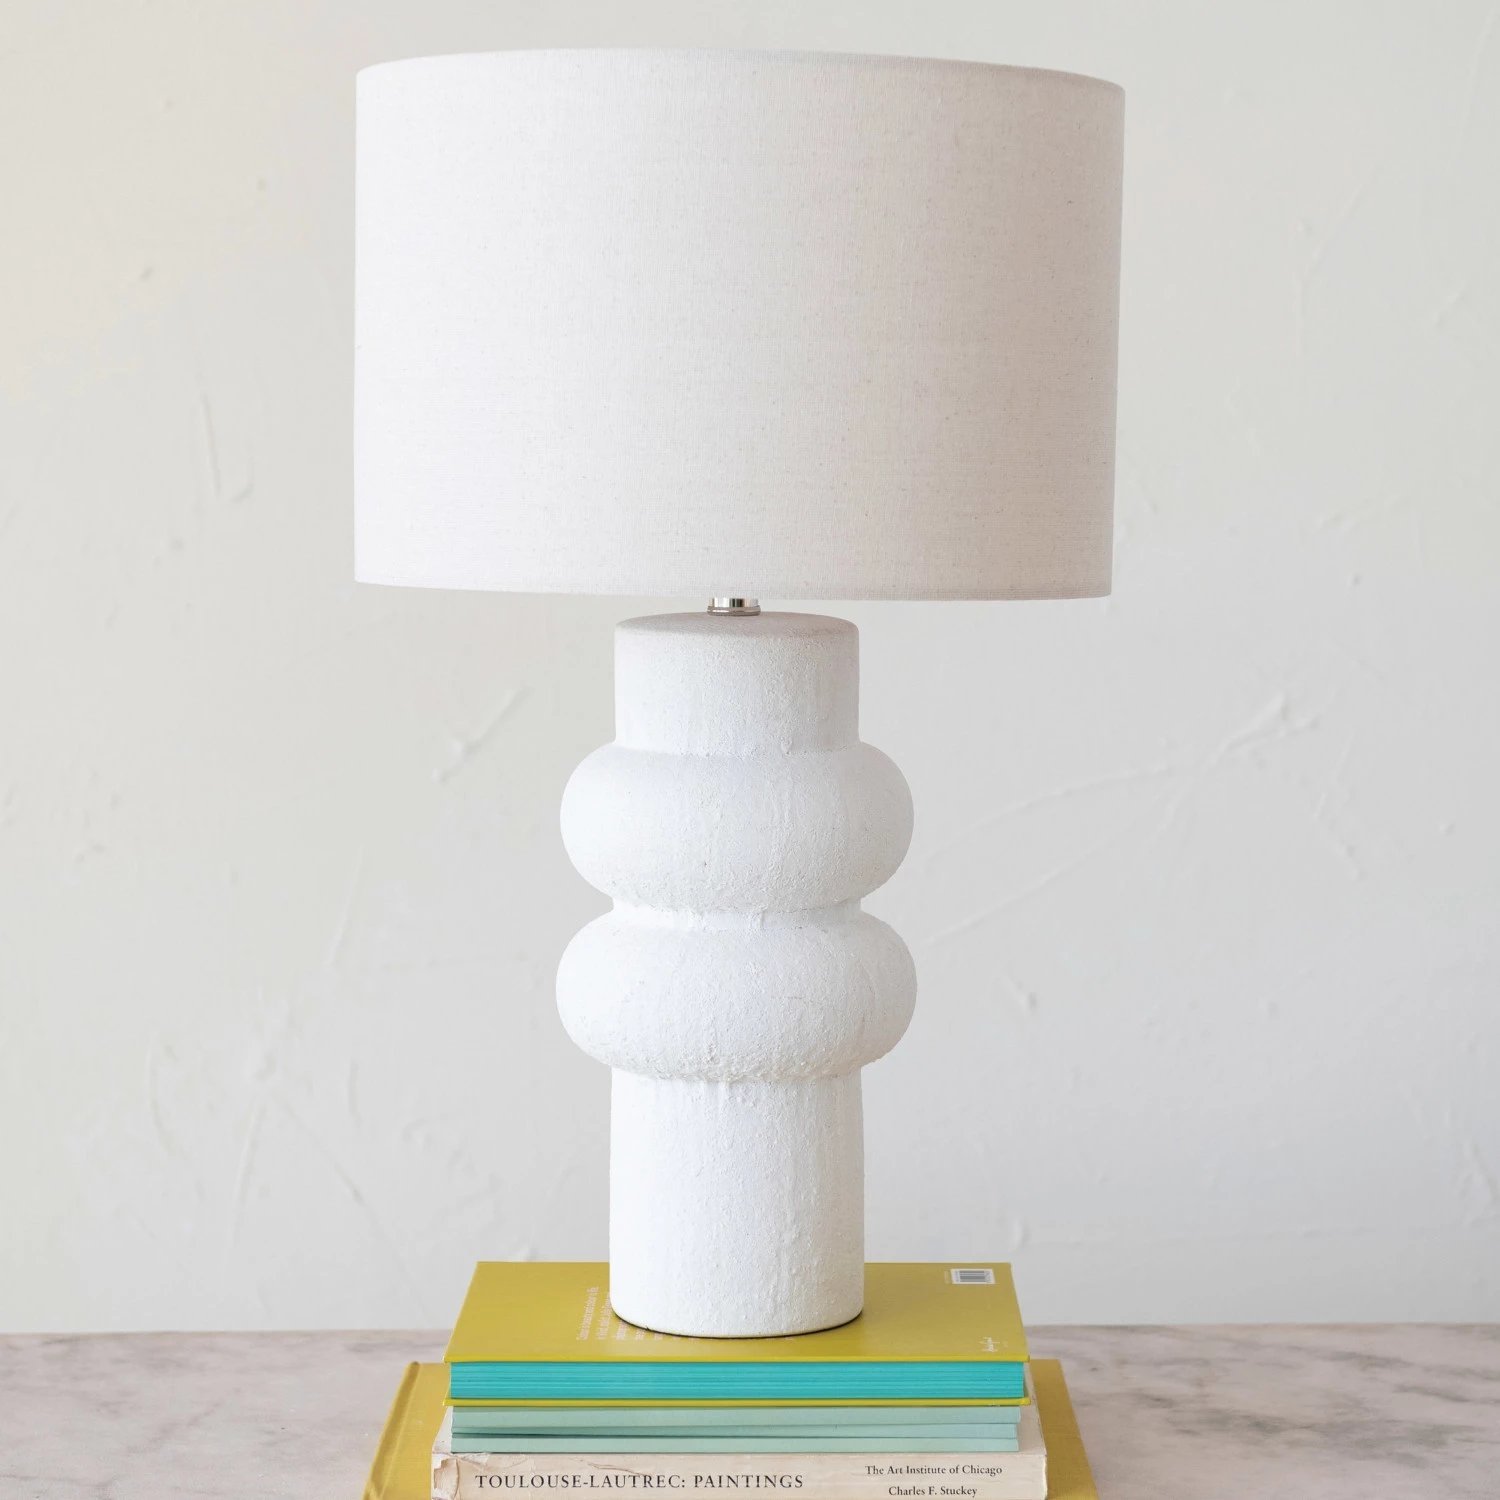  Stoneware Table Lamp with Linen Shade, White Volcano Finish - Image 1